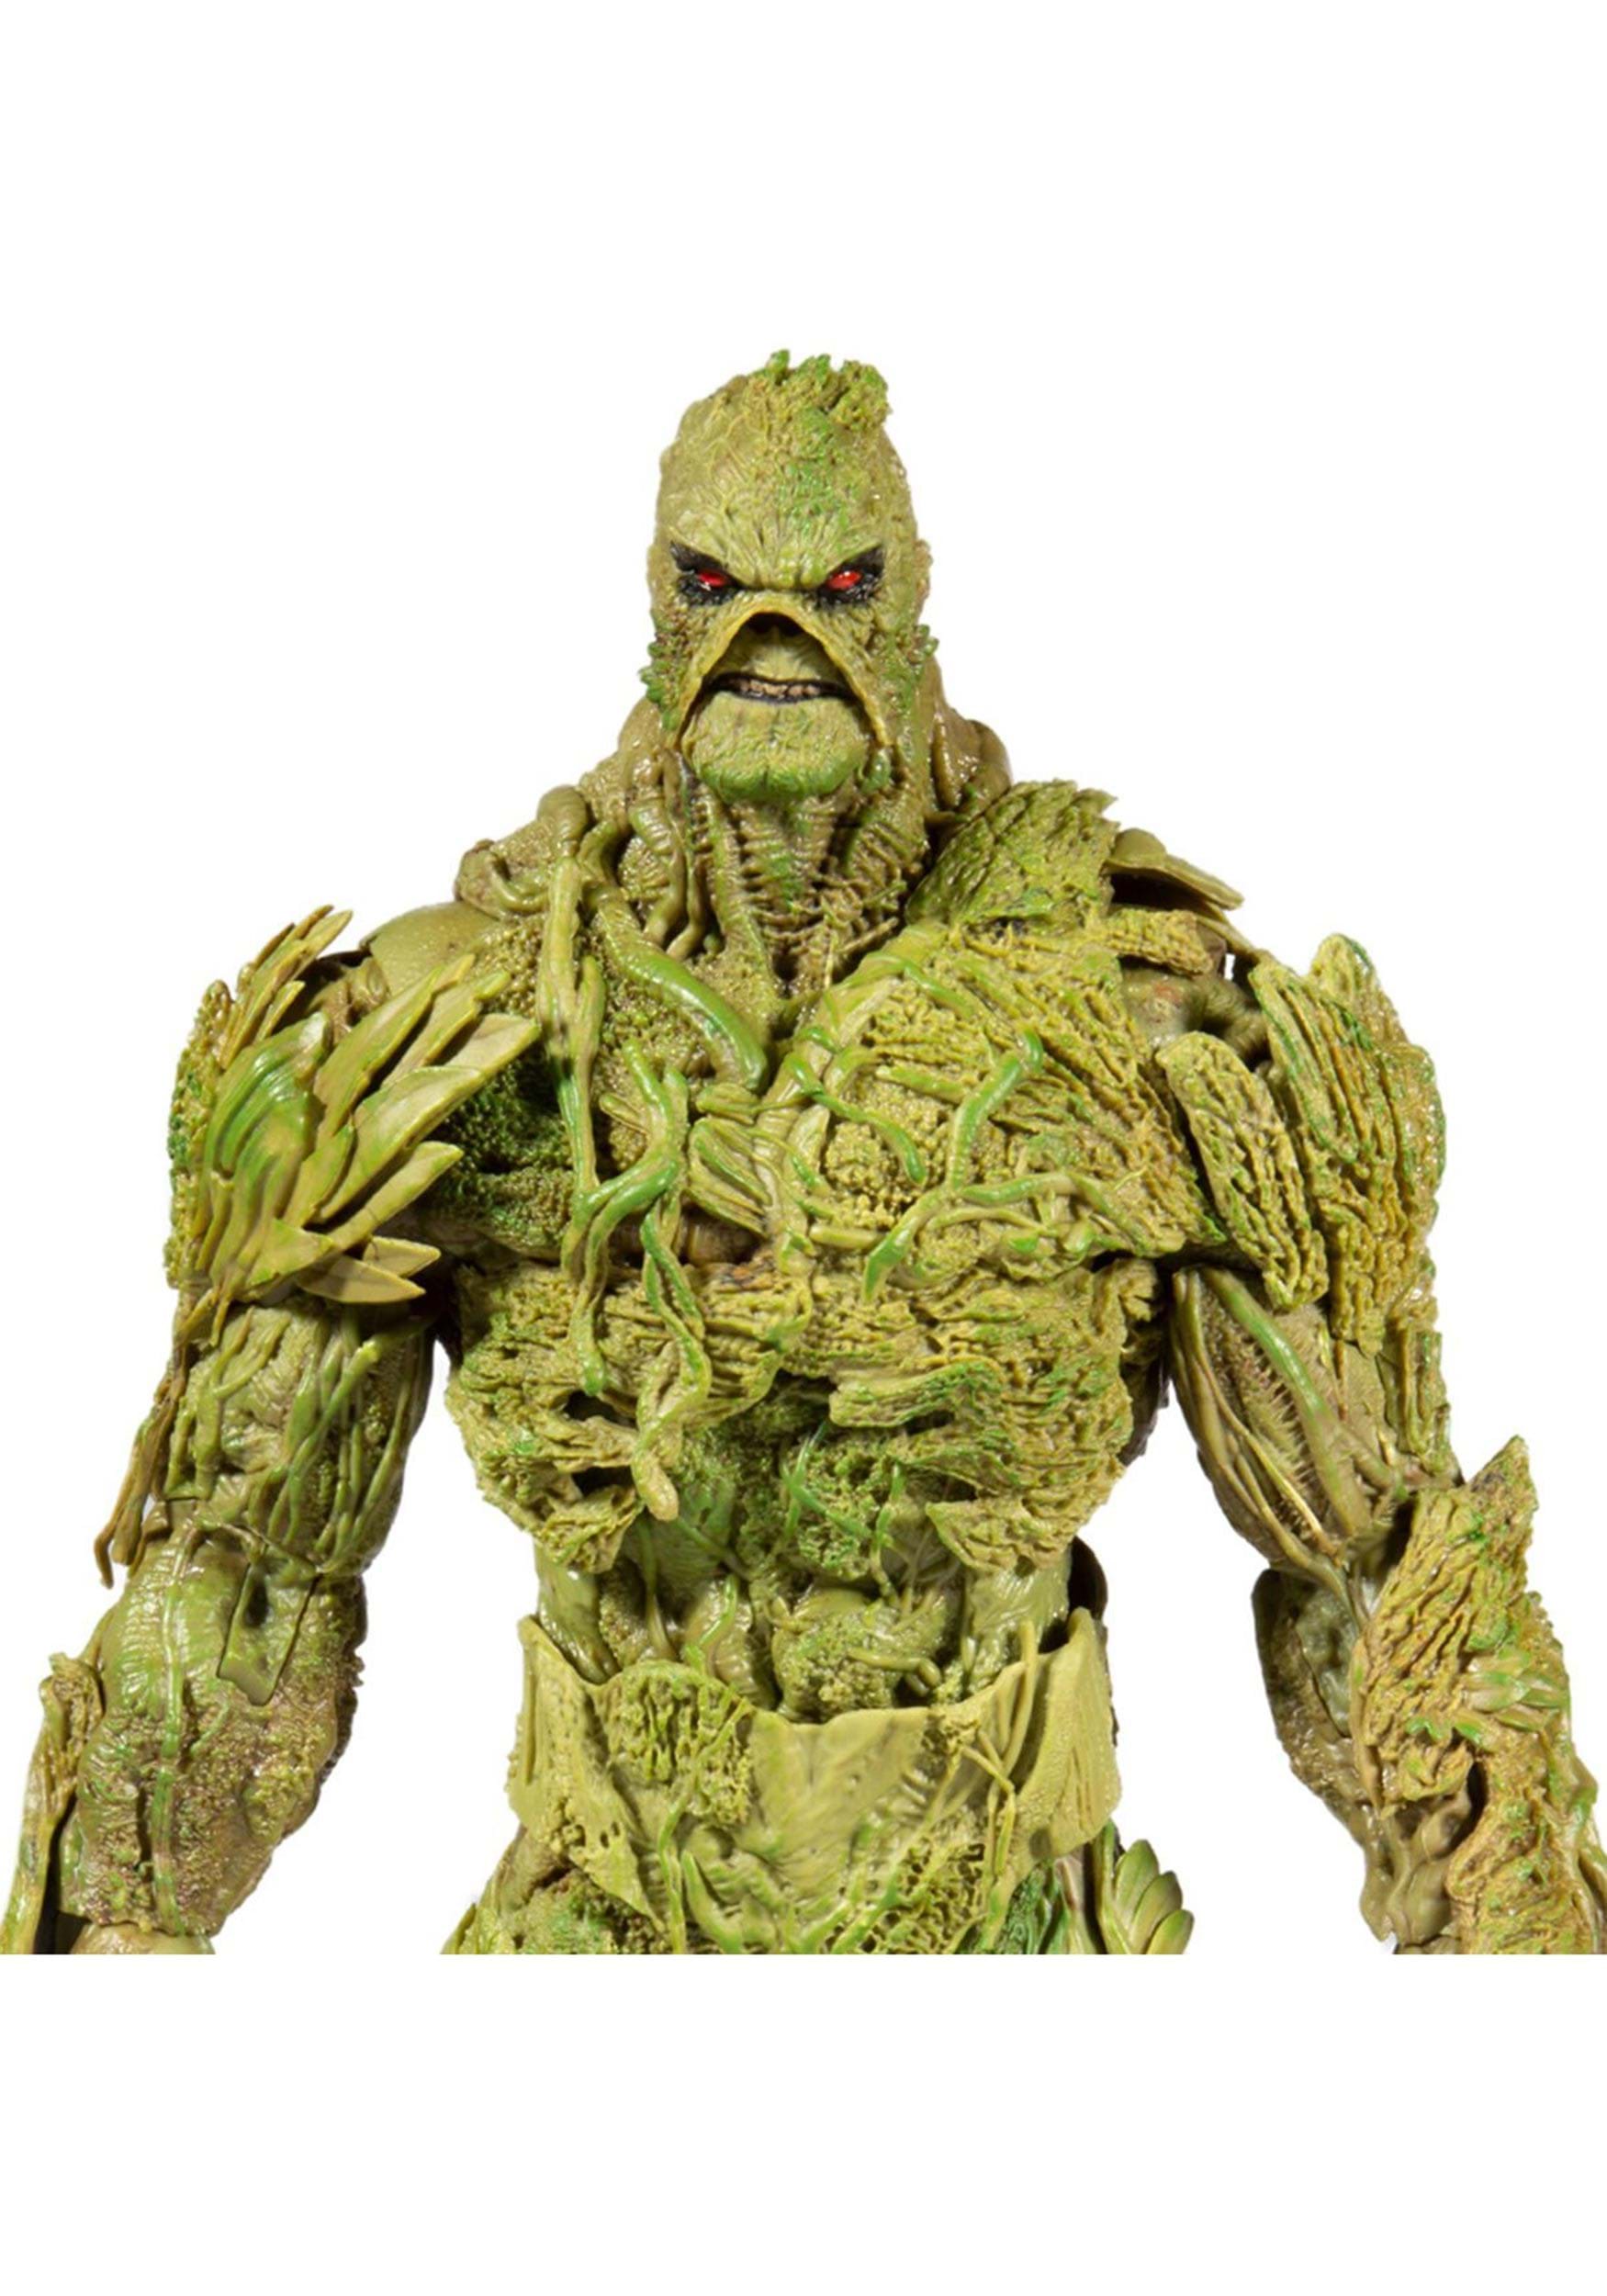 https://images.fun.com/products/80164/1-1/dc-collector-swamp-thing-megafig-action-figure.jpg